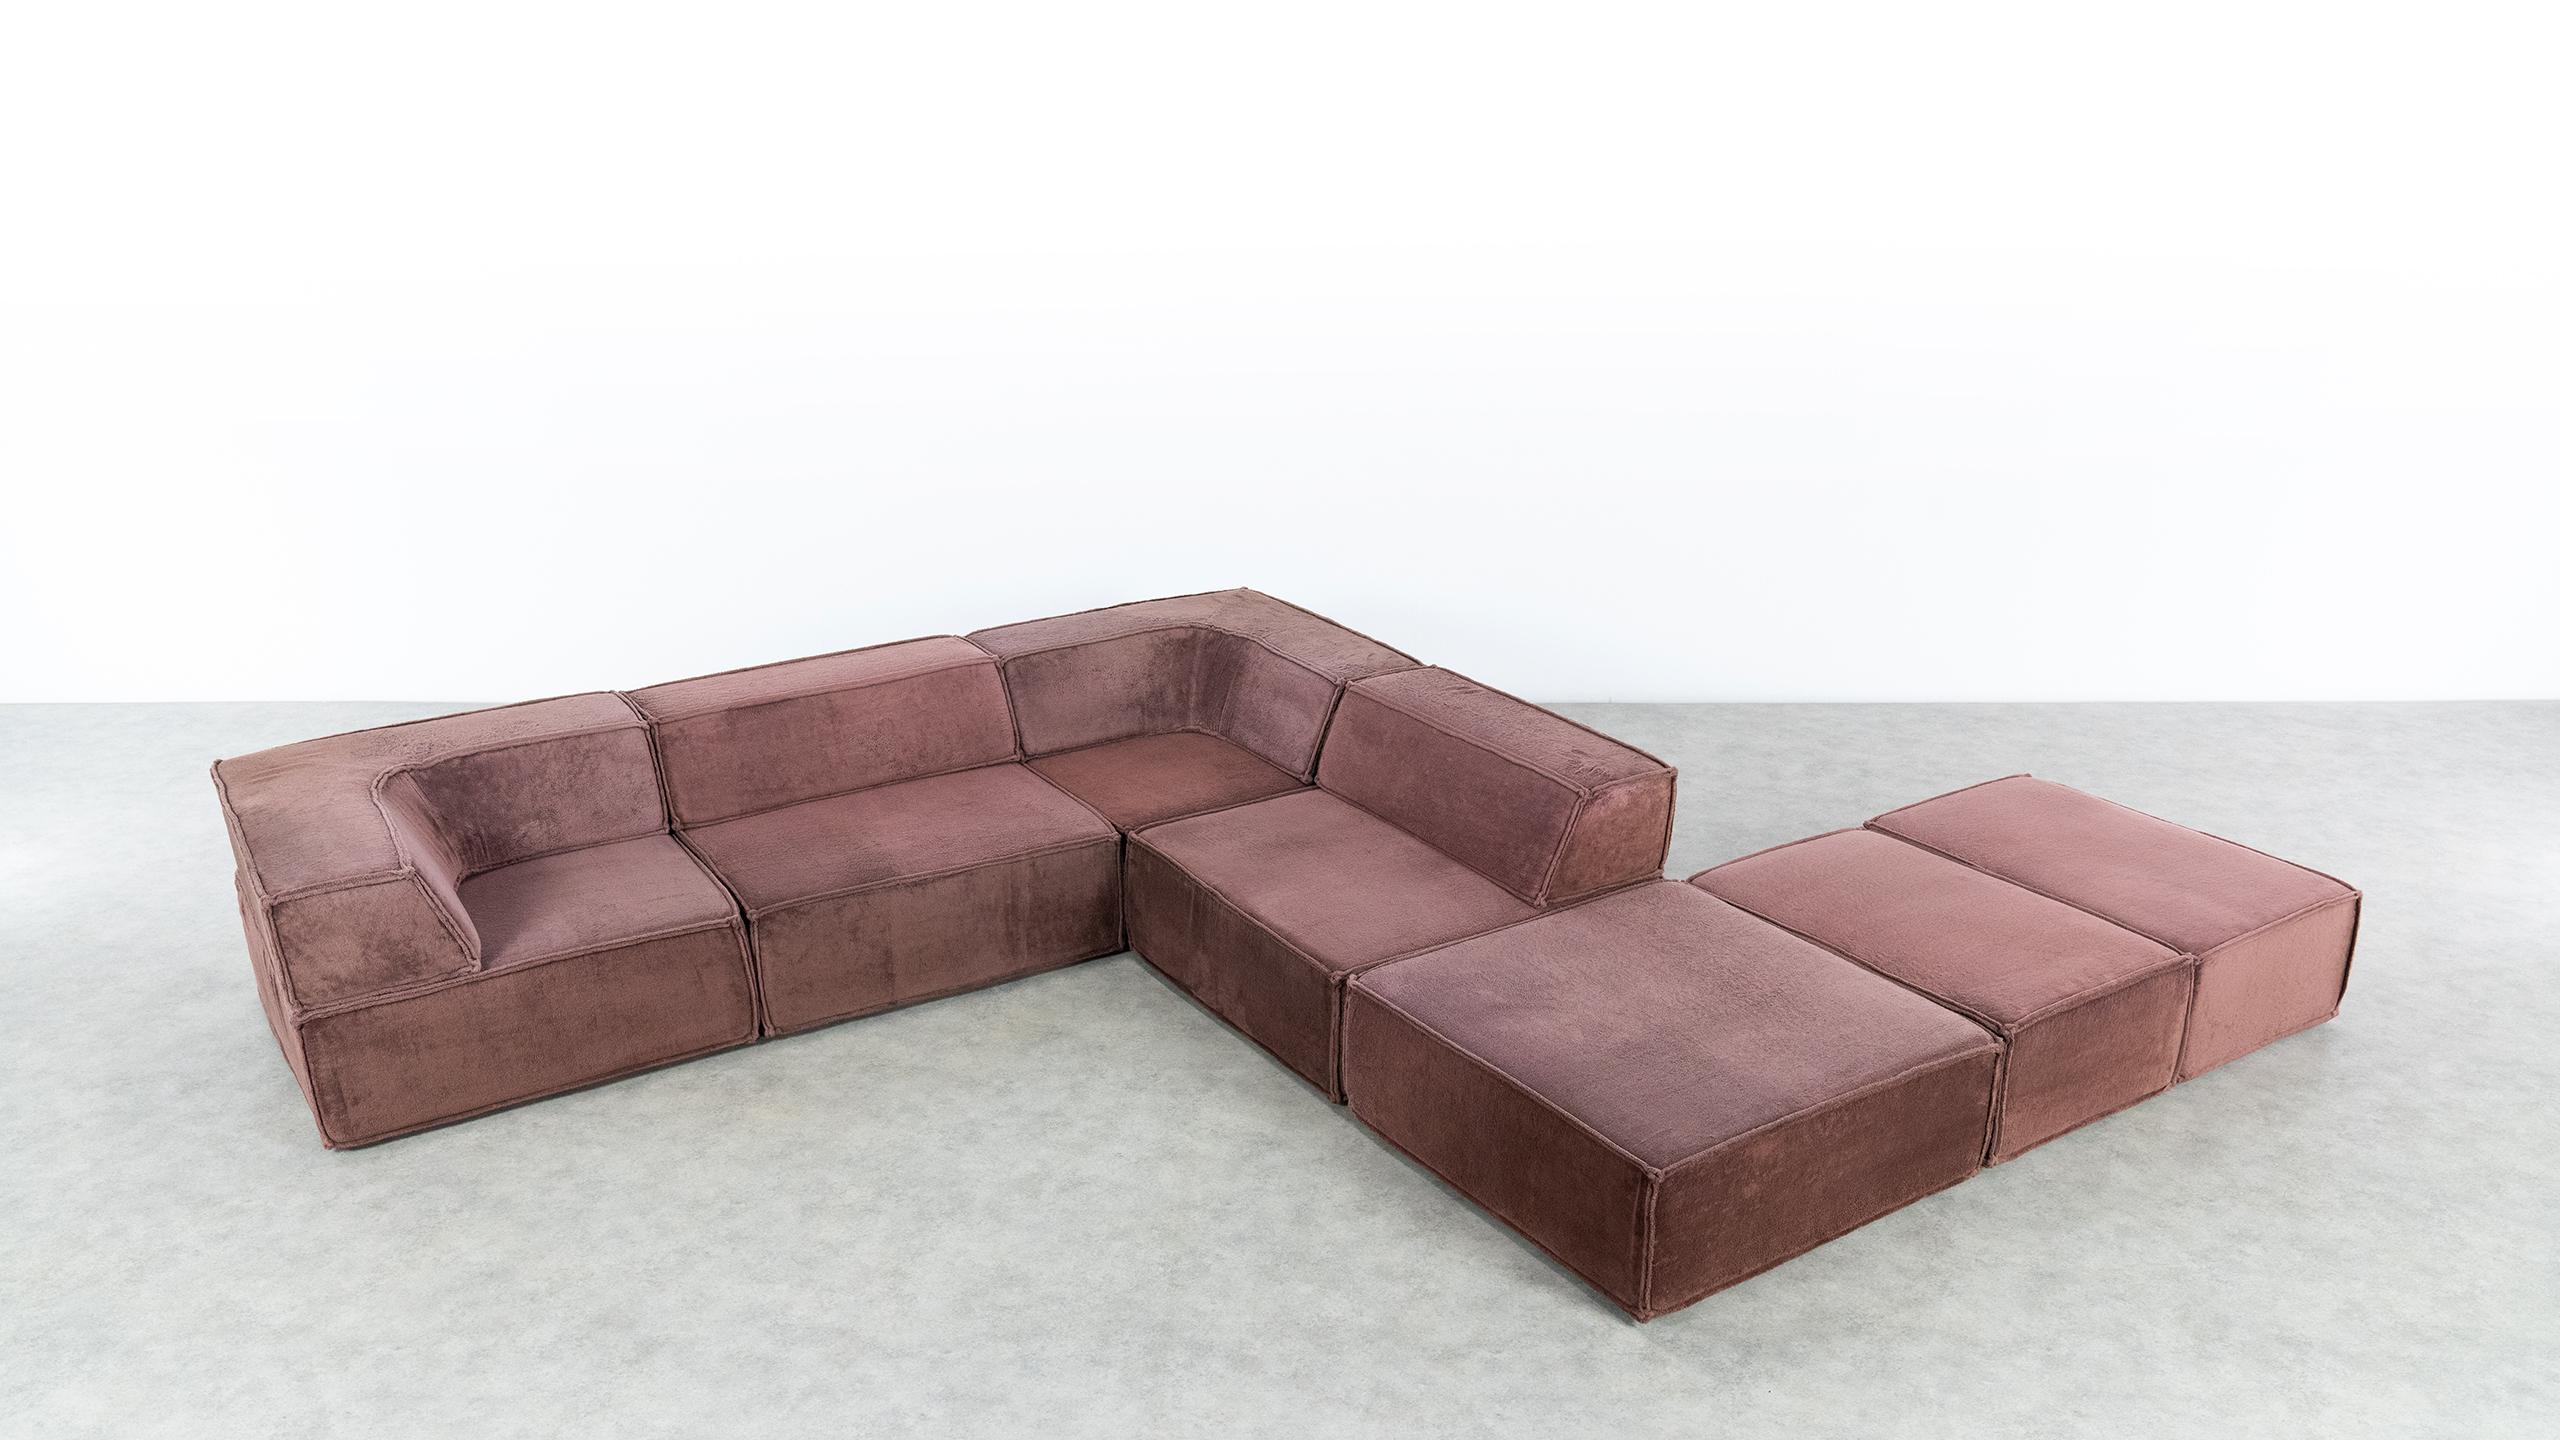 COR Trio Modular Sofa, Giant Landscape in Brown, 1972 by Team Form AG, Swiss 11